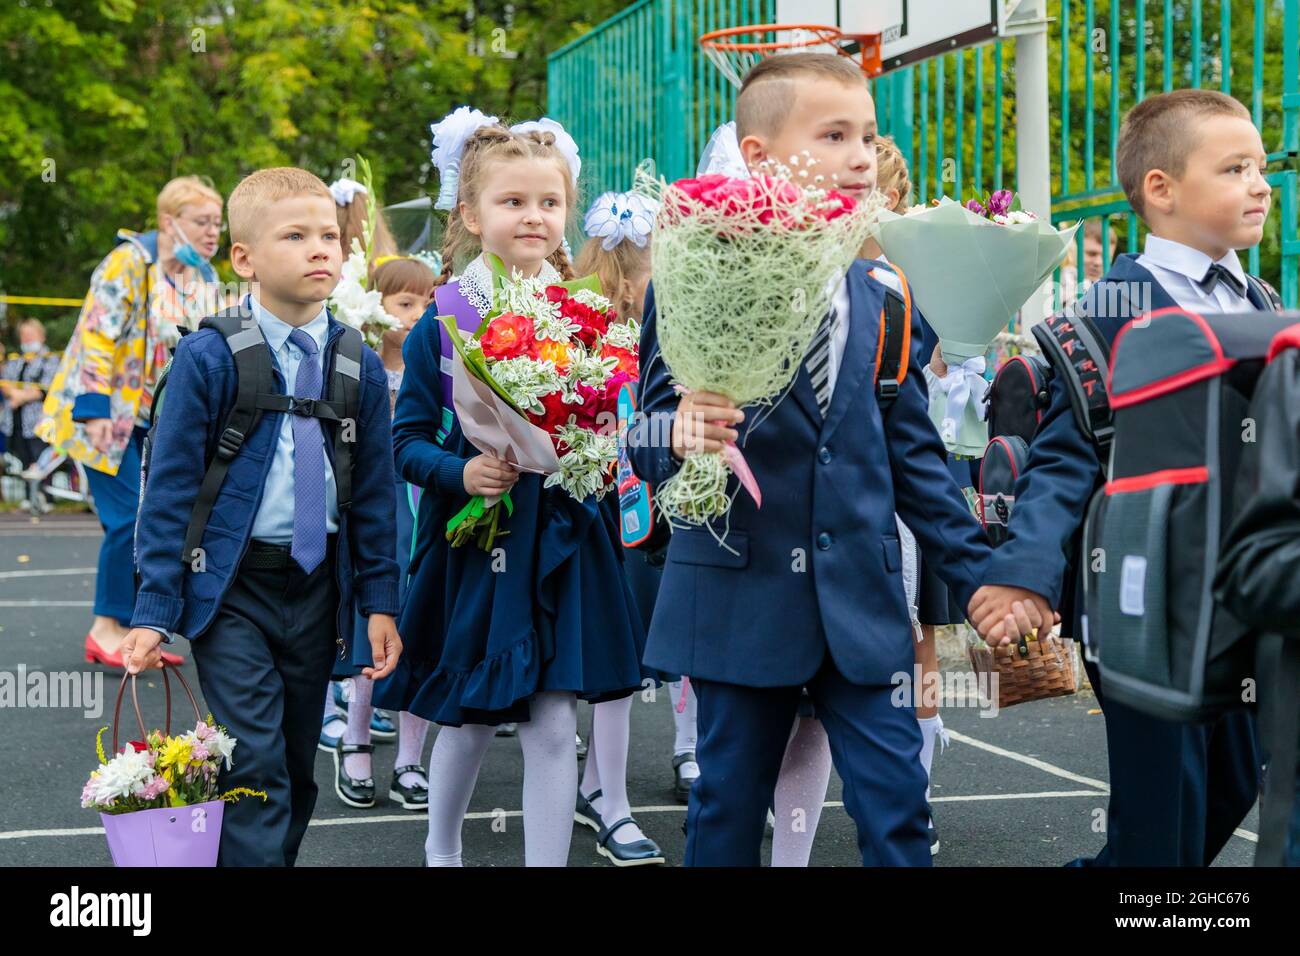 First graders walk with bouquets on September 1. Children go to school, first grade with flowers. School education concept. Moscow, Russia, September Stock Photo